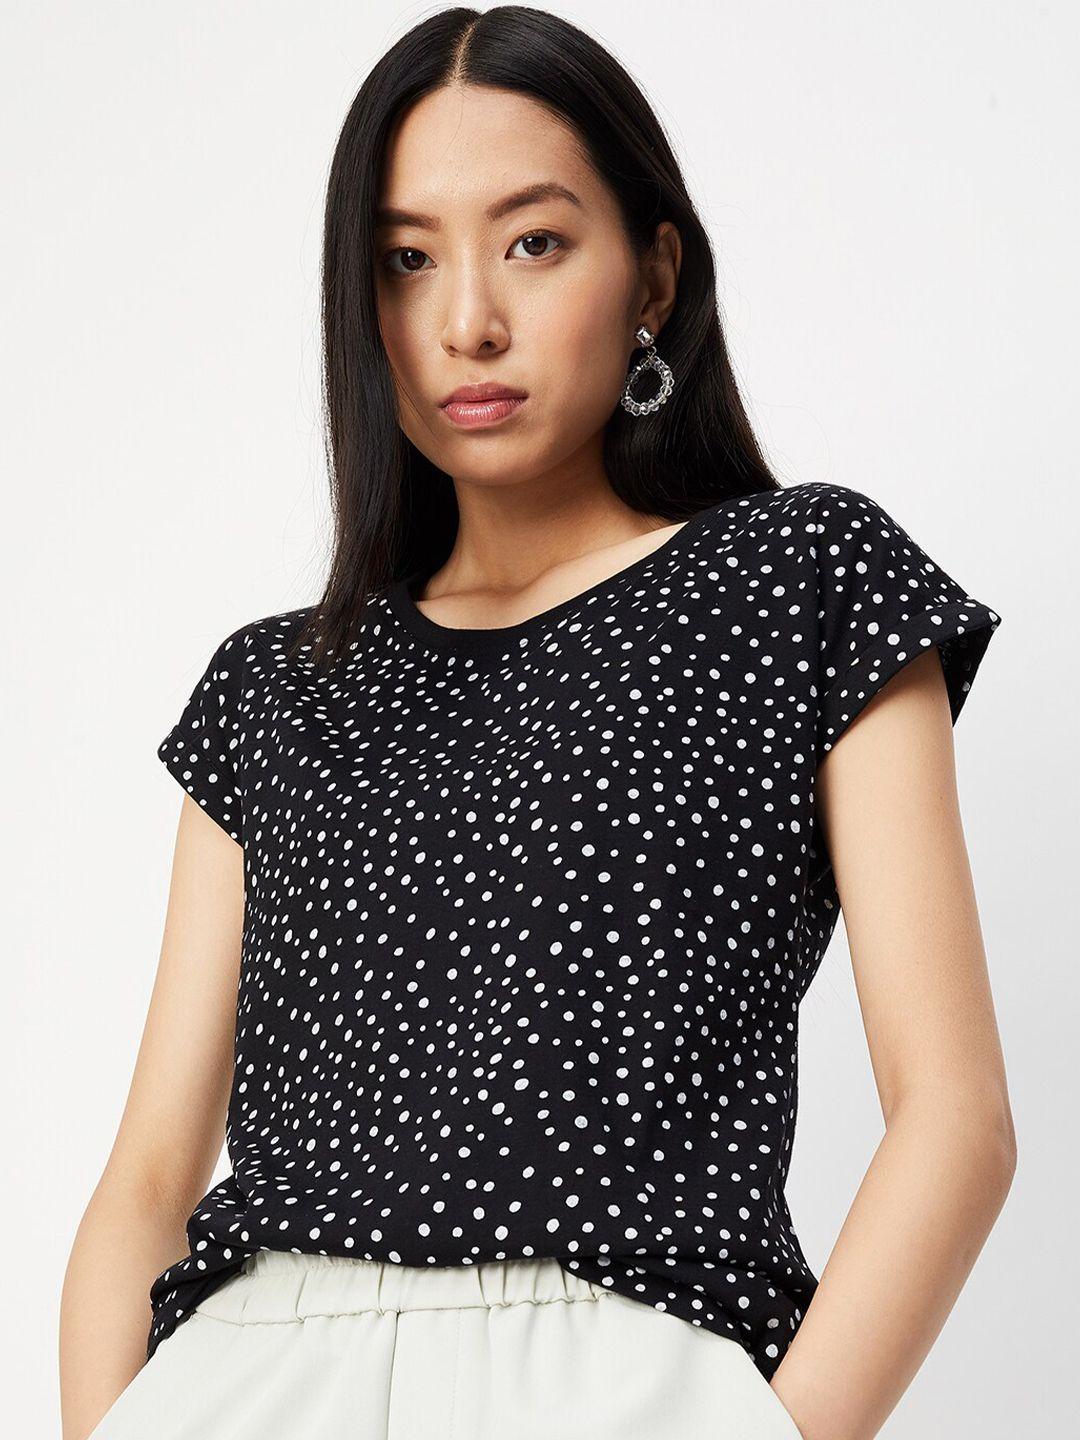 max polka dots printed extended sleeves pure cotton t-shirt